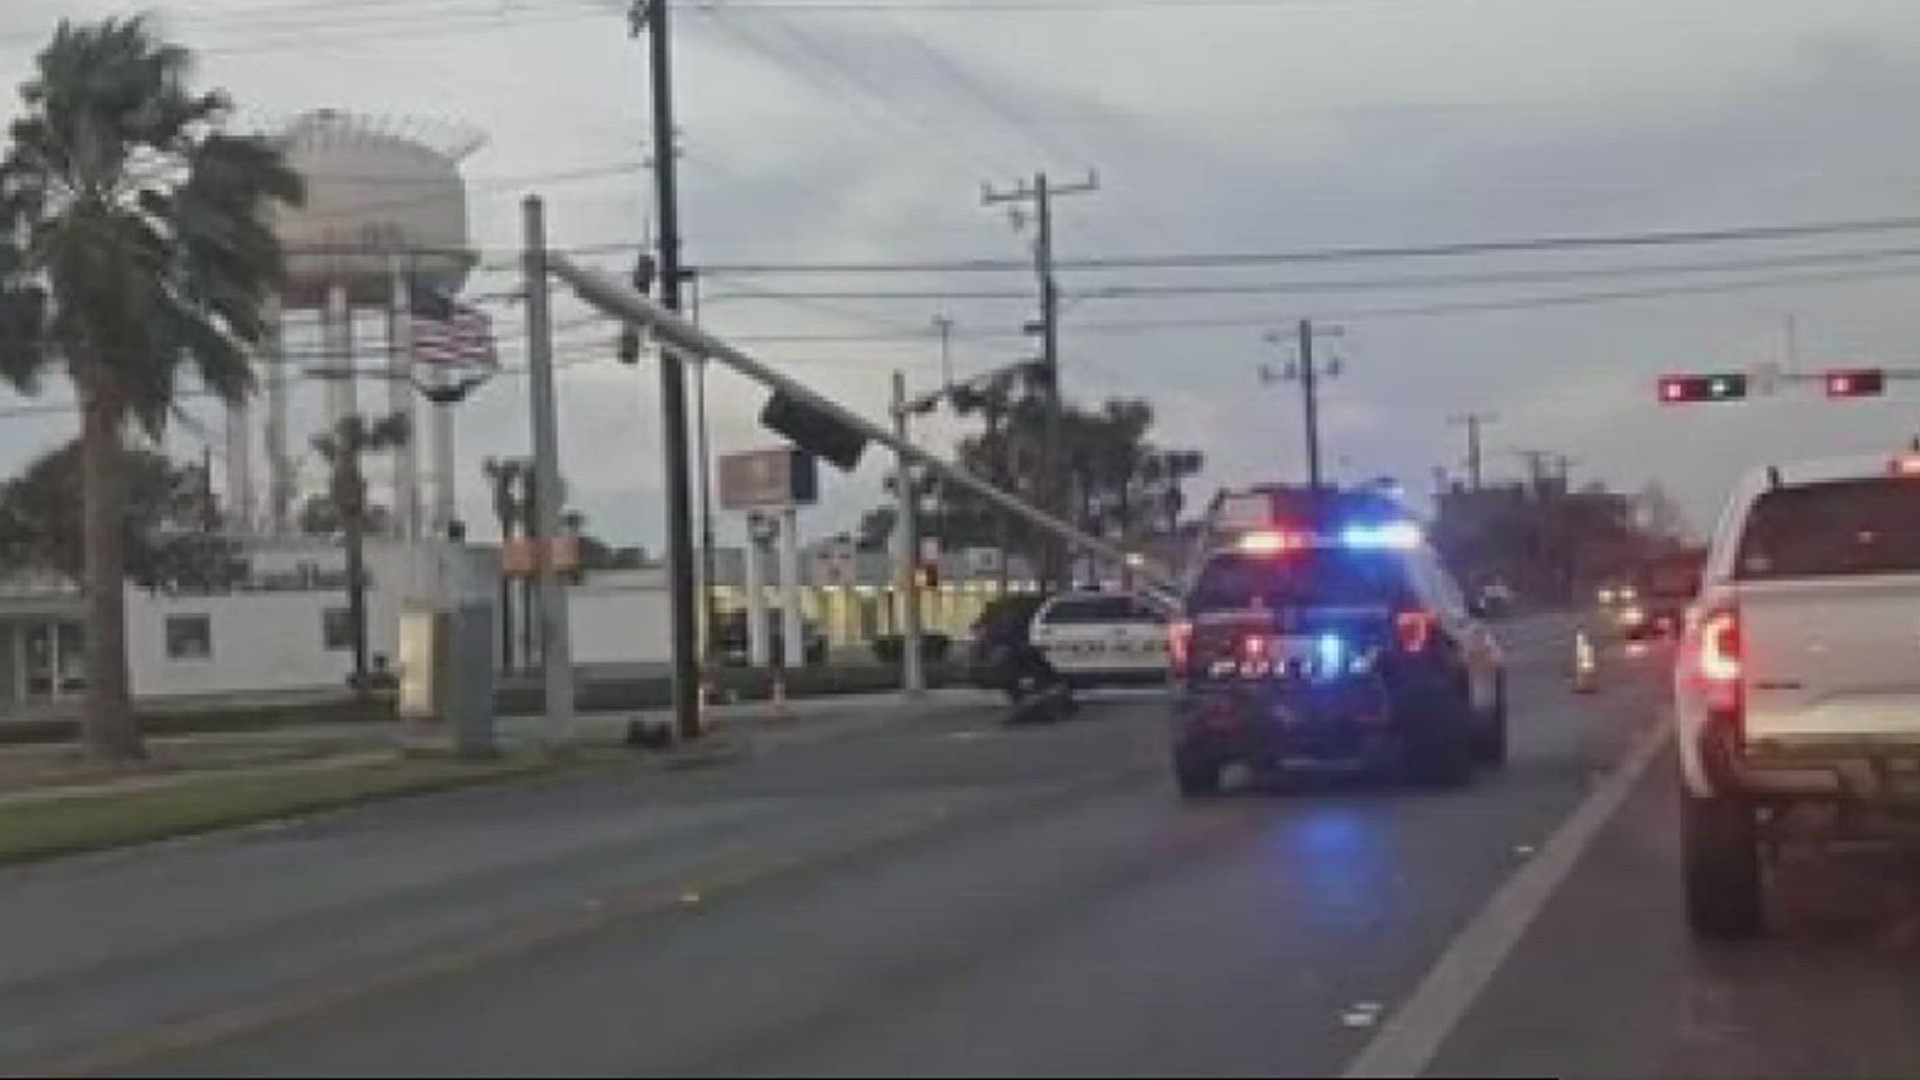 Corpus Christi councilman Mike Pusley previously told 3NEWS that strong winds were partially to blame for the incident.